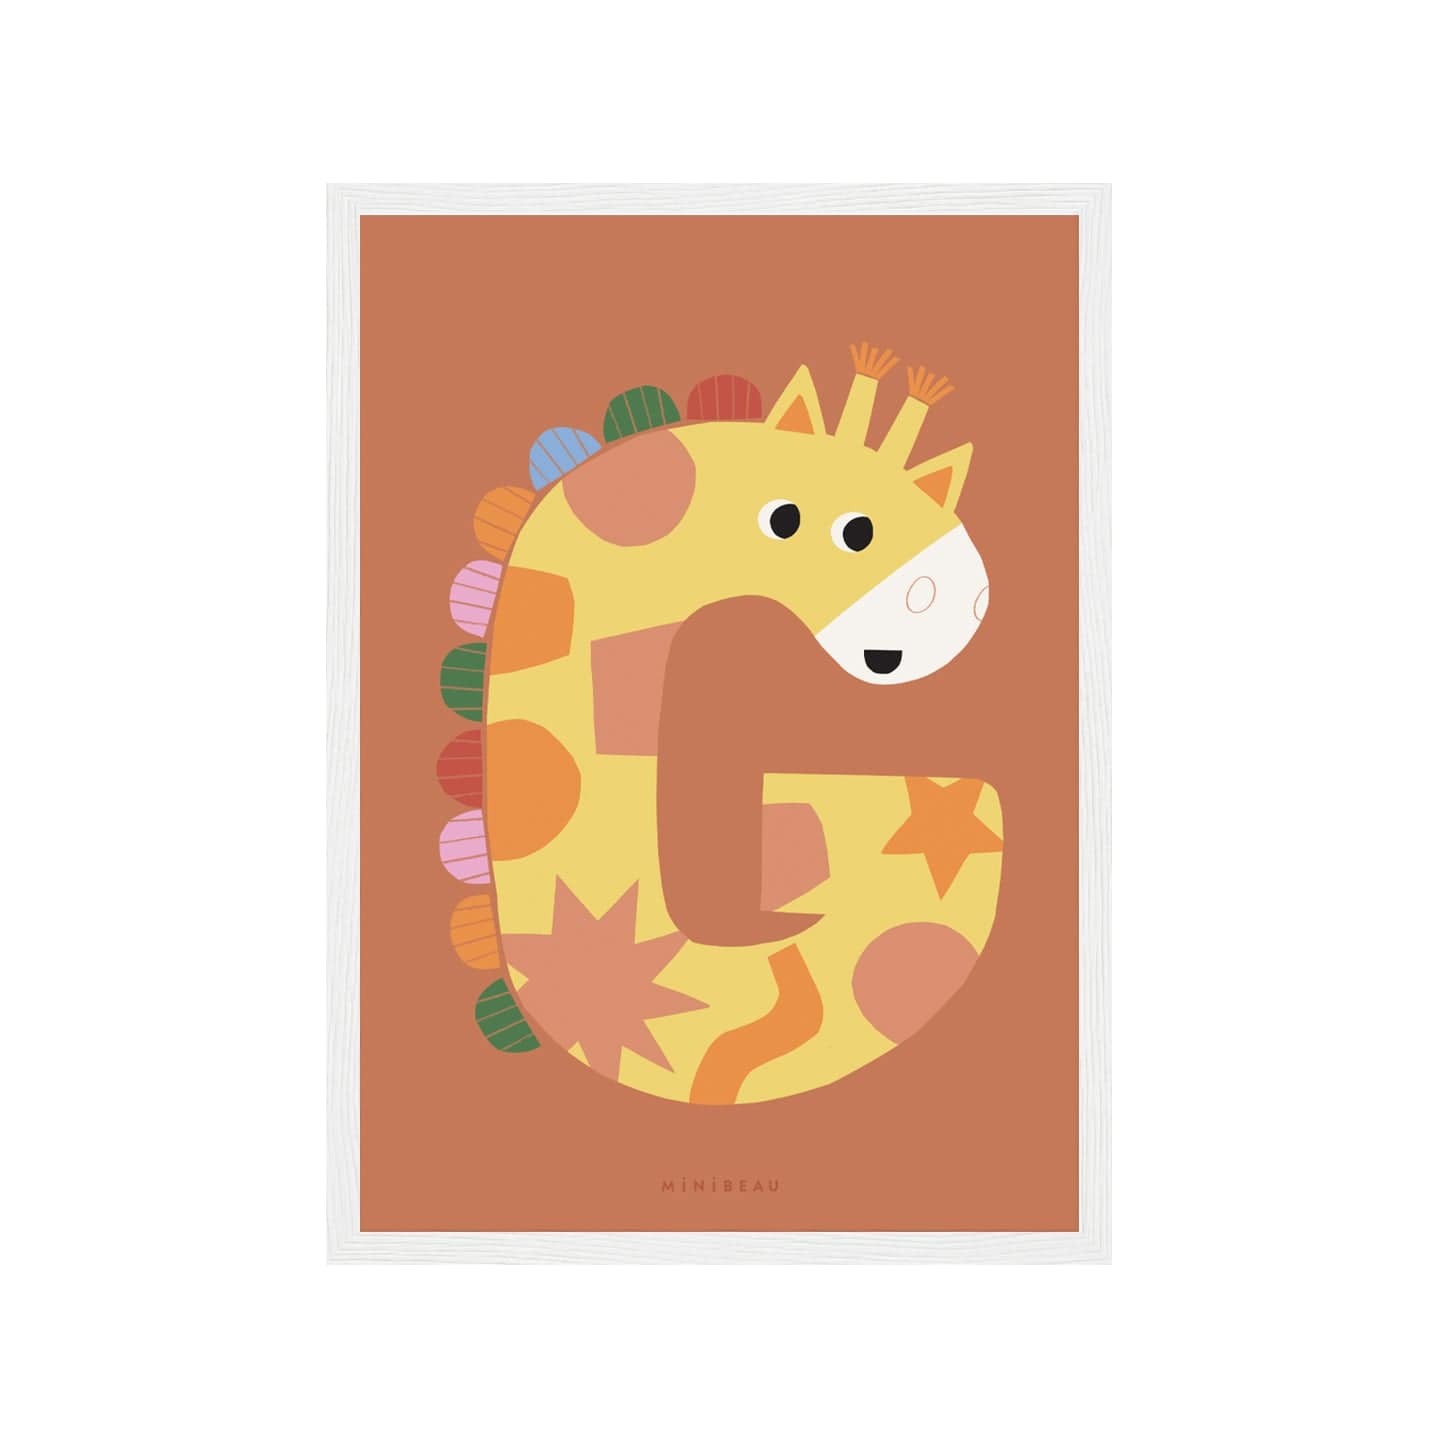 Art print in a white frame. Our Happy Alphabet 'G' Art Print shows a smiling giraffe in the shape of a G with a rainbow coloured mane on an orange/rust background.